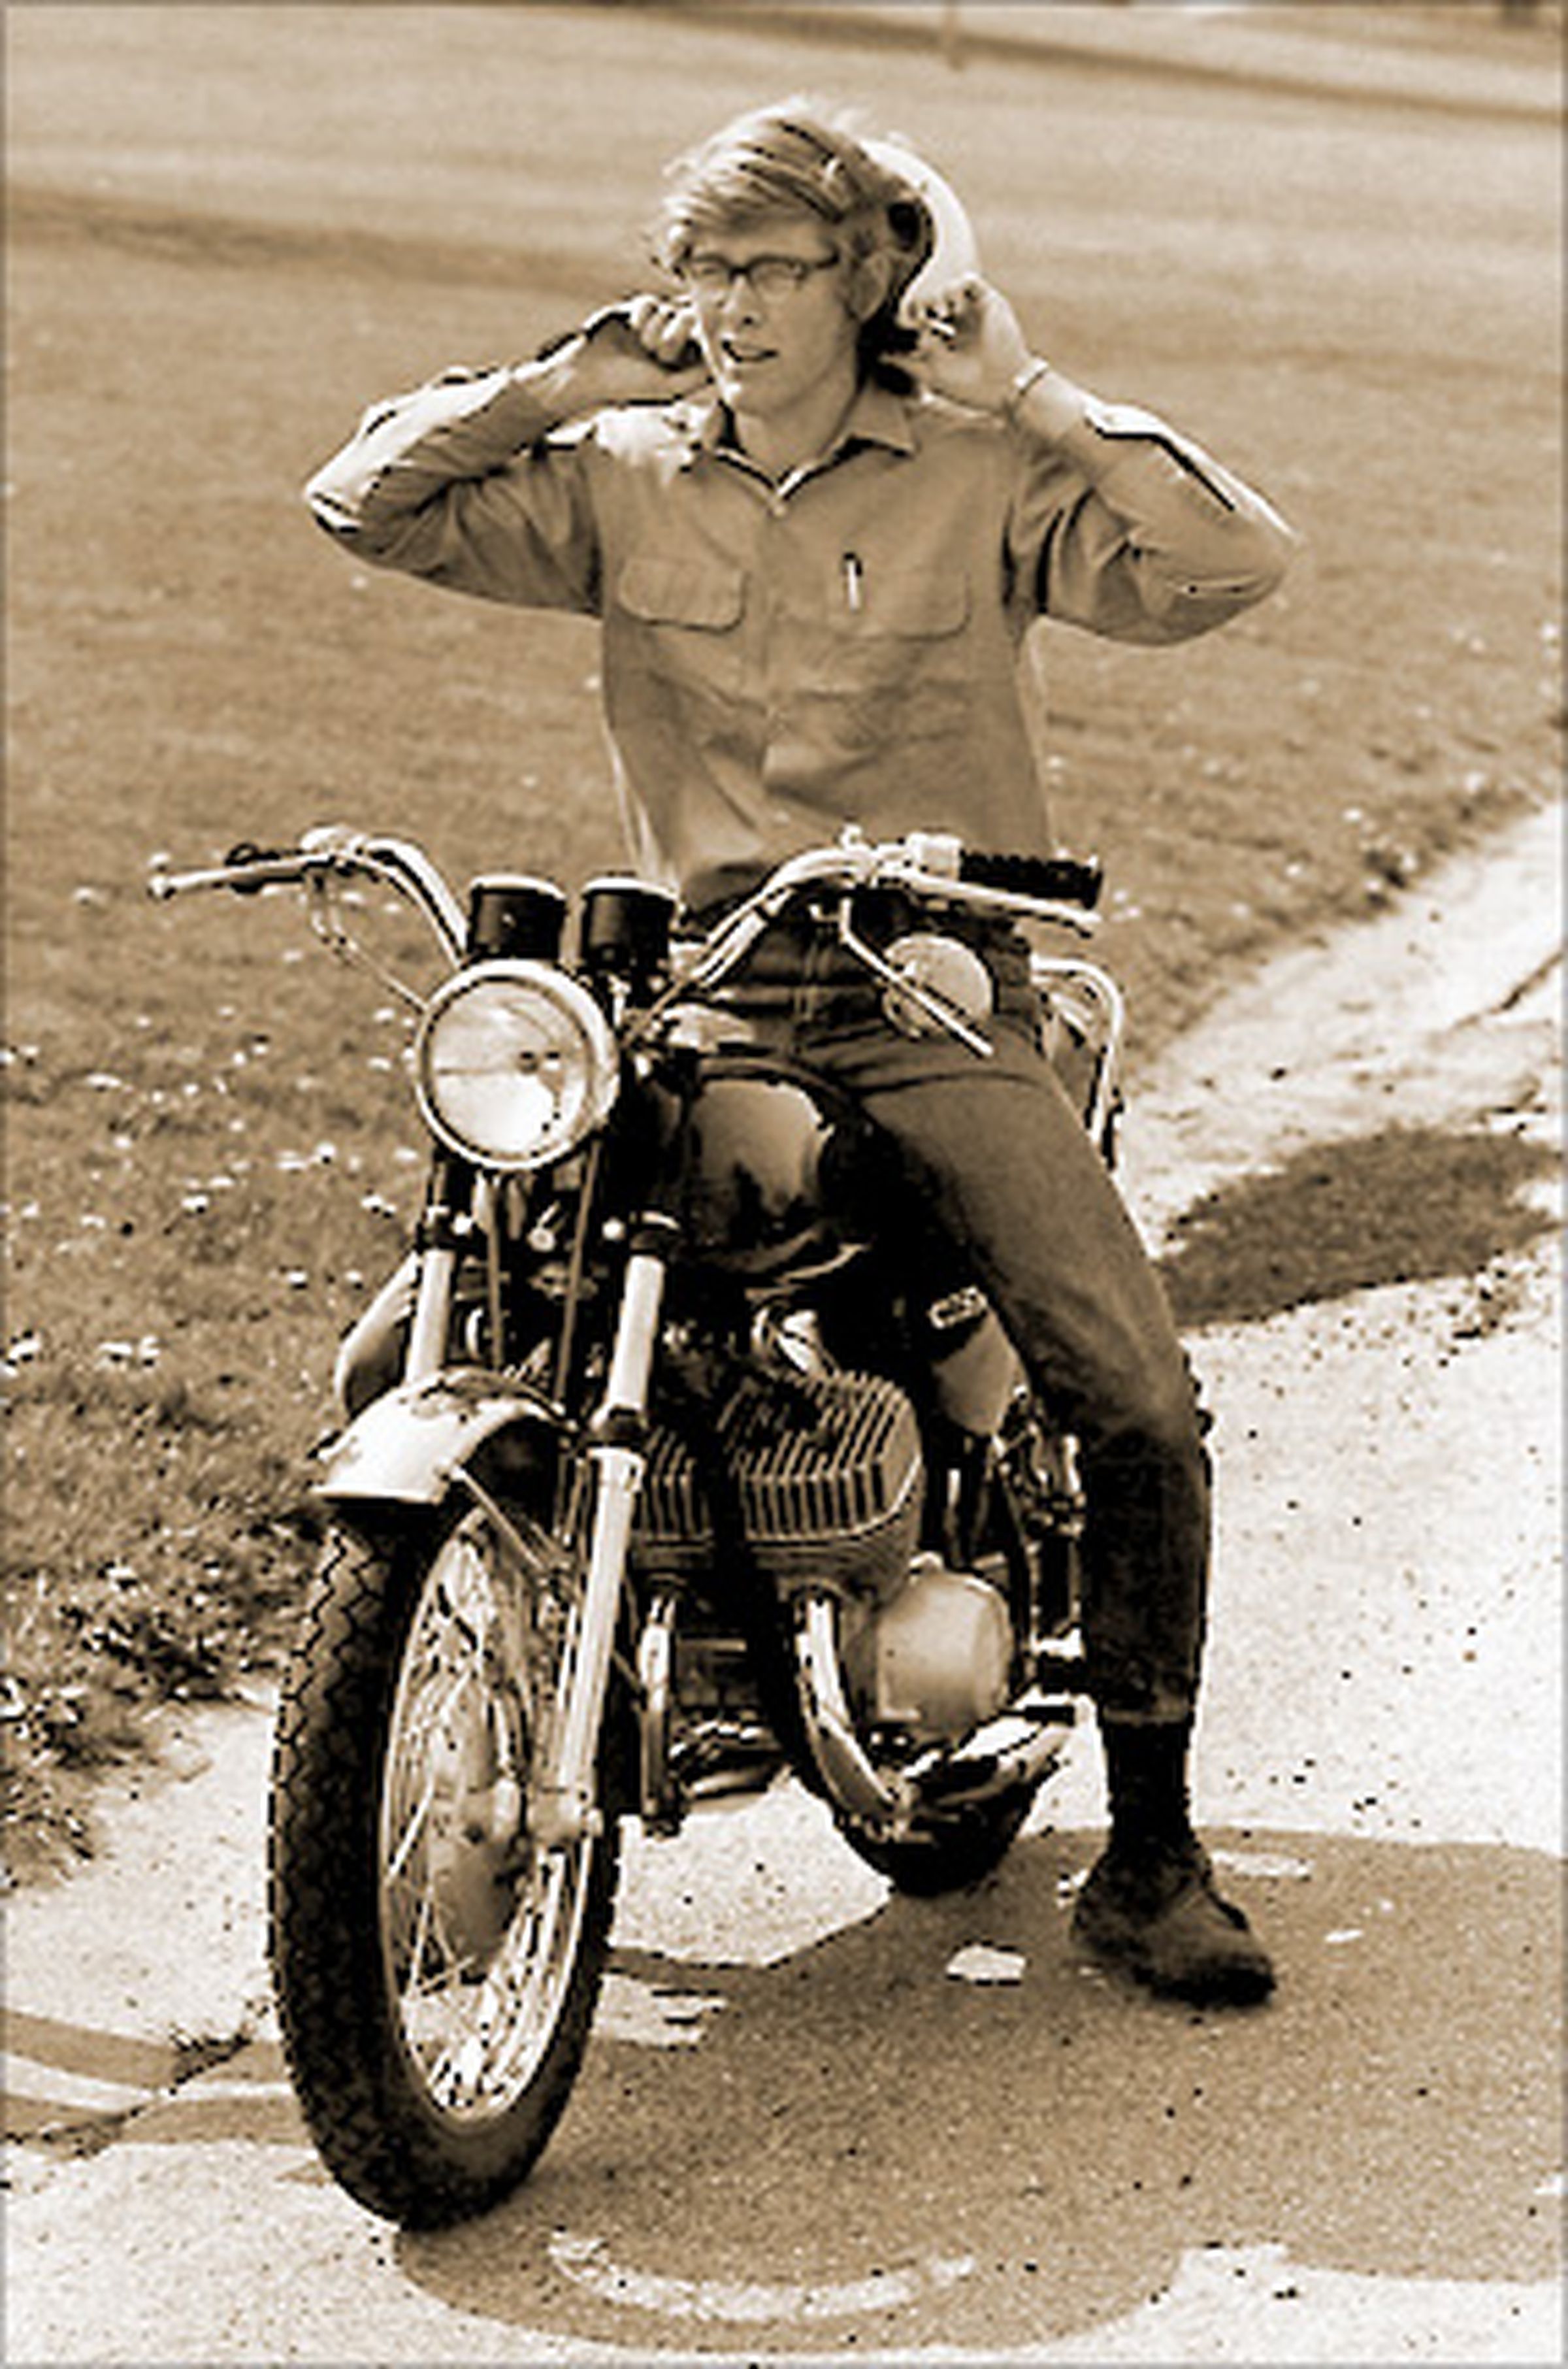 A young David Hall on his favorite motorcycle.